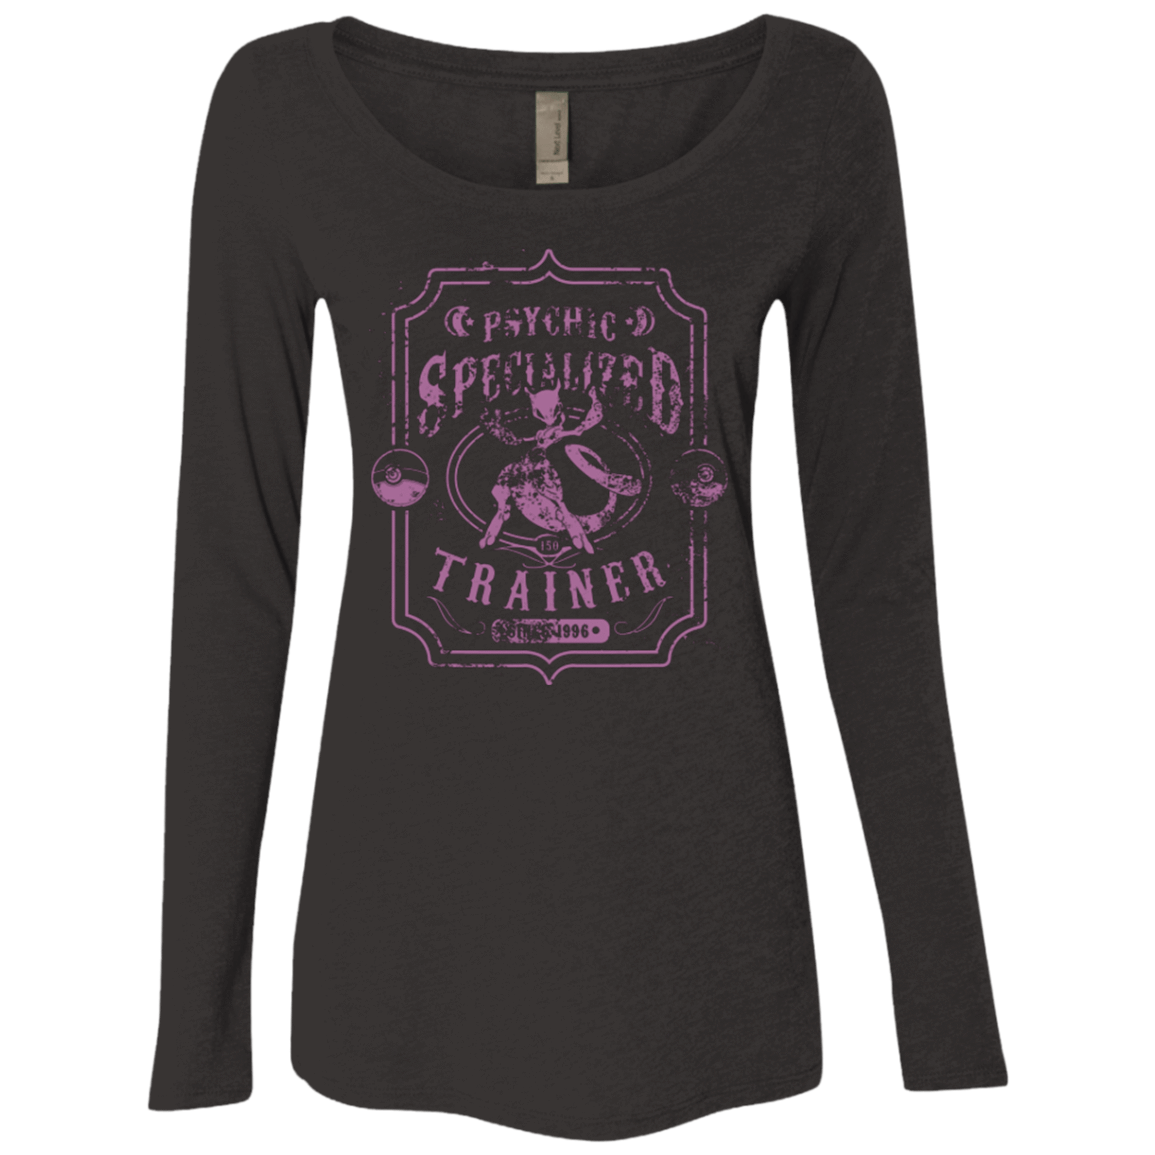 T-Shirts Vintage Black / Small Psychic Specialized Trainer 2 Women's Triblend Long Sleeve Shirt